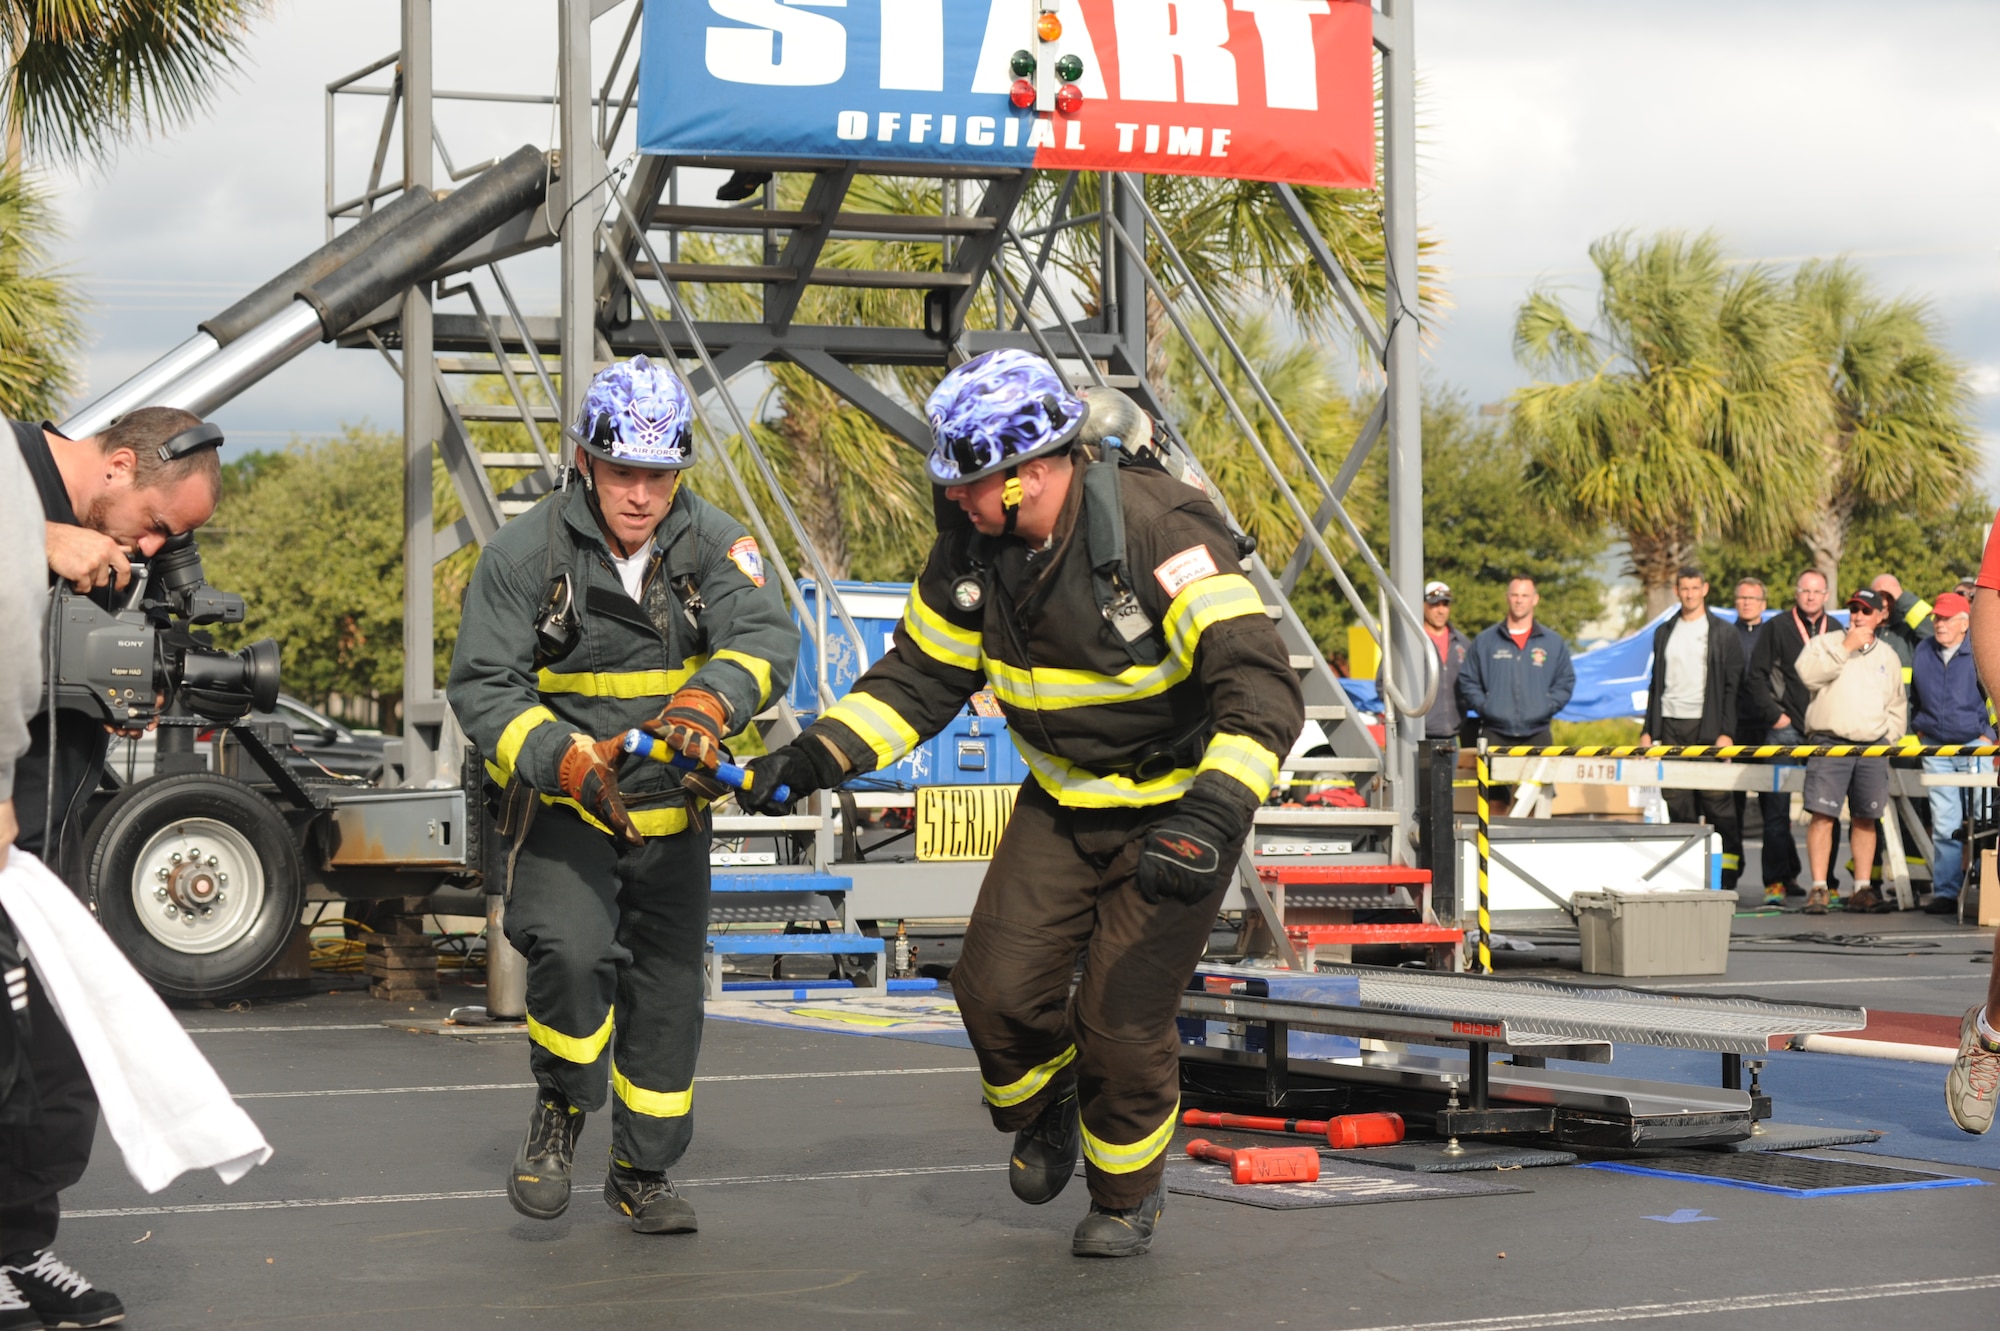 Timothy Vanden Haak of the Whiteman Air Force Base Fire Department passes the baton to Mark Belton during a qualifying run during the World Firefighter Combat Challenge XX Nov. 17, 2011, in Myrtle Beach, S.C.  The Whiteman AFB, Mo., team advanced to the final competition in the men's relay team category and won the silver medal. (U.S. Air Force photo/John Van Winkle)